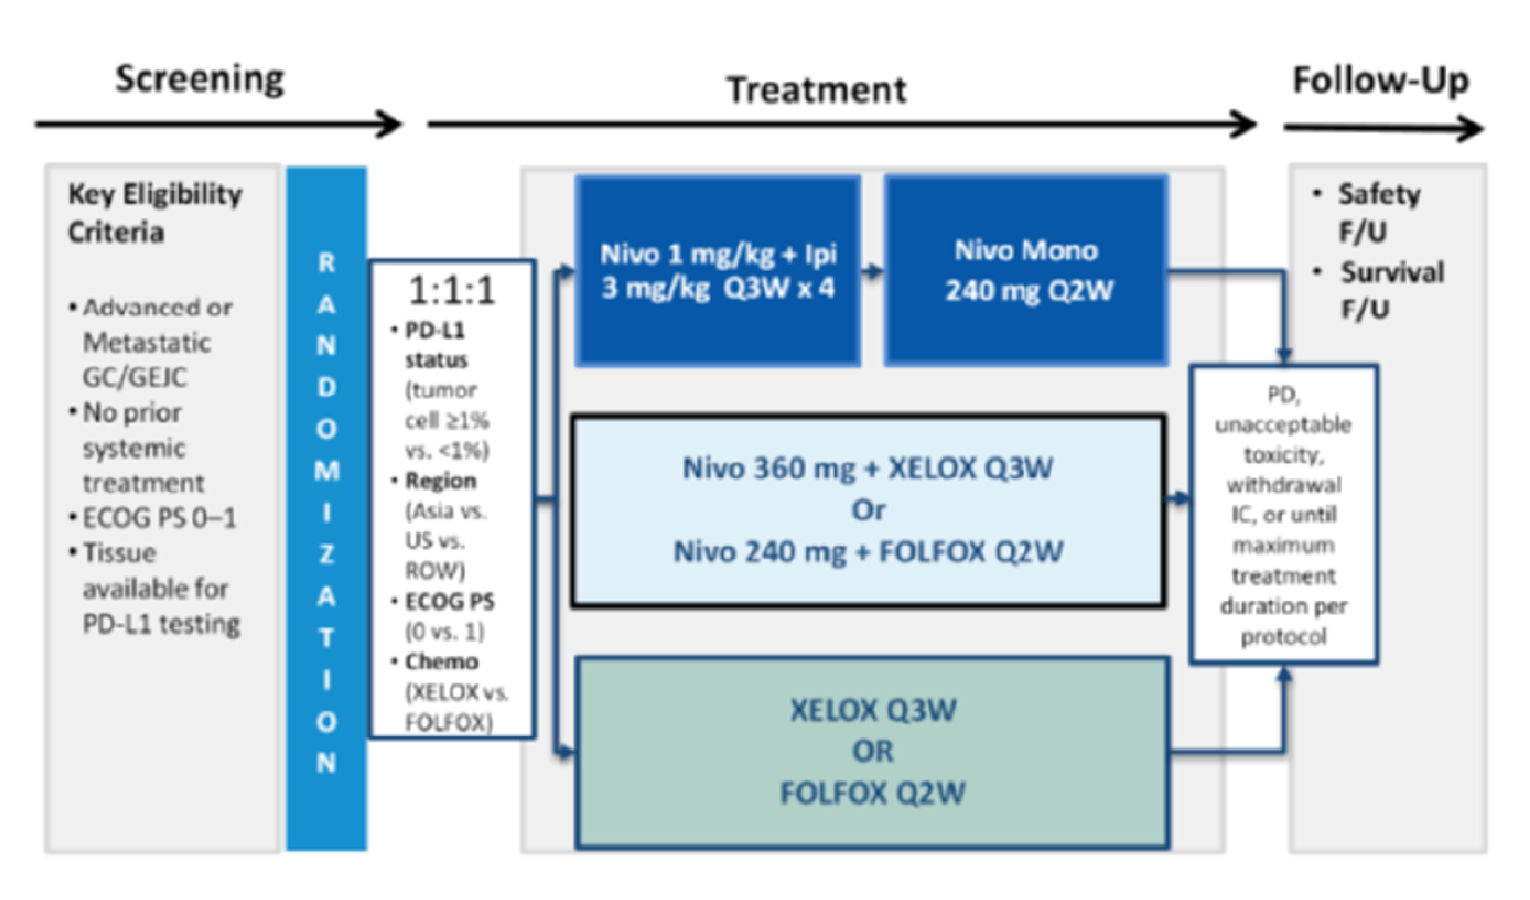 Flow chart summarizing the overall design of the CheckMate-649 trial. During the screening period before randomization, patients were evaluated for key eligibility criteria (advanced or metastatic GC or GEJC, no prior systemic treatment, ECOG PS 0 or 1, and tissue available for PD-L1 testing). Patients were randomized 1:1:1 to receive nivolumab plus ipilimumab followed by nivolumab monotherapy, nivolumab plus chemotherapy, or chemotherapy. Randomization was stratified by PD-L1 status, region, ECOG PS, and chemotherapy regimen. Treatment was continued until progressive disease, unacceptable toxicity, withdrawal of consent, or the maximum treatment duration per protocol. Patients were followed up for safety and survival.